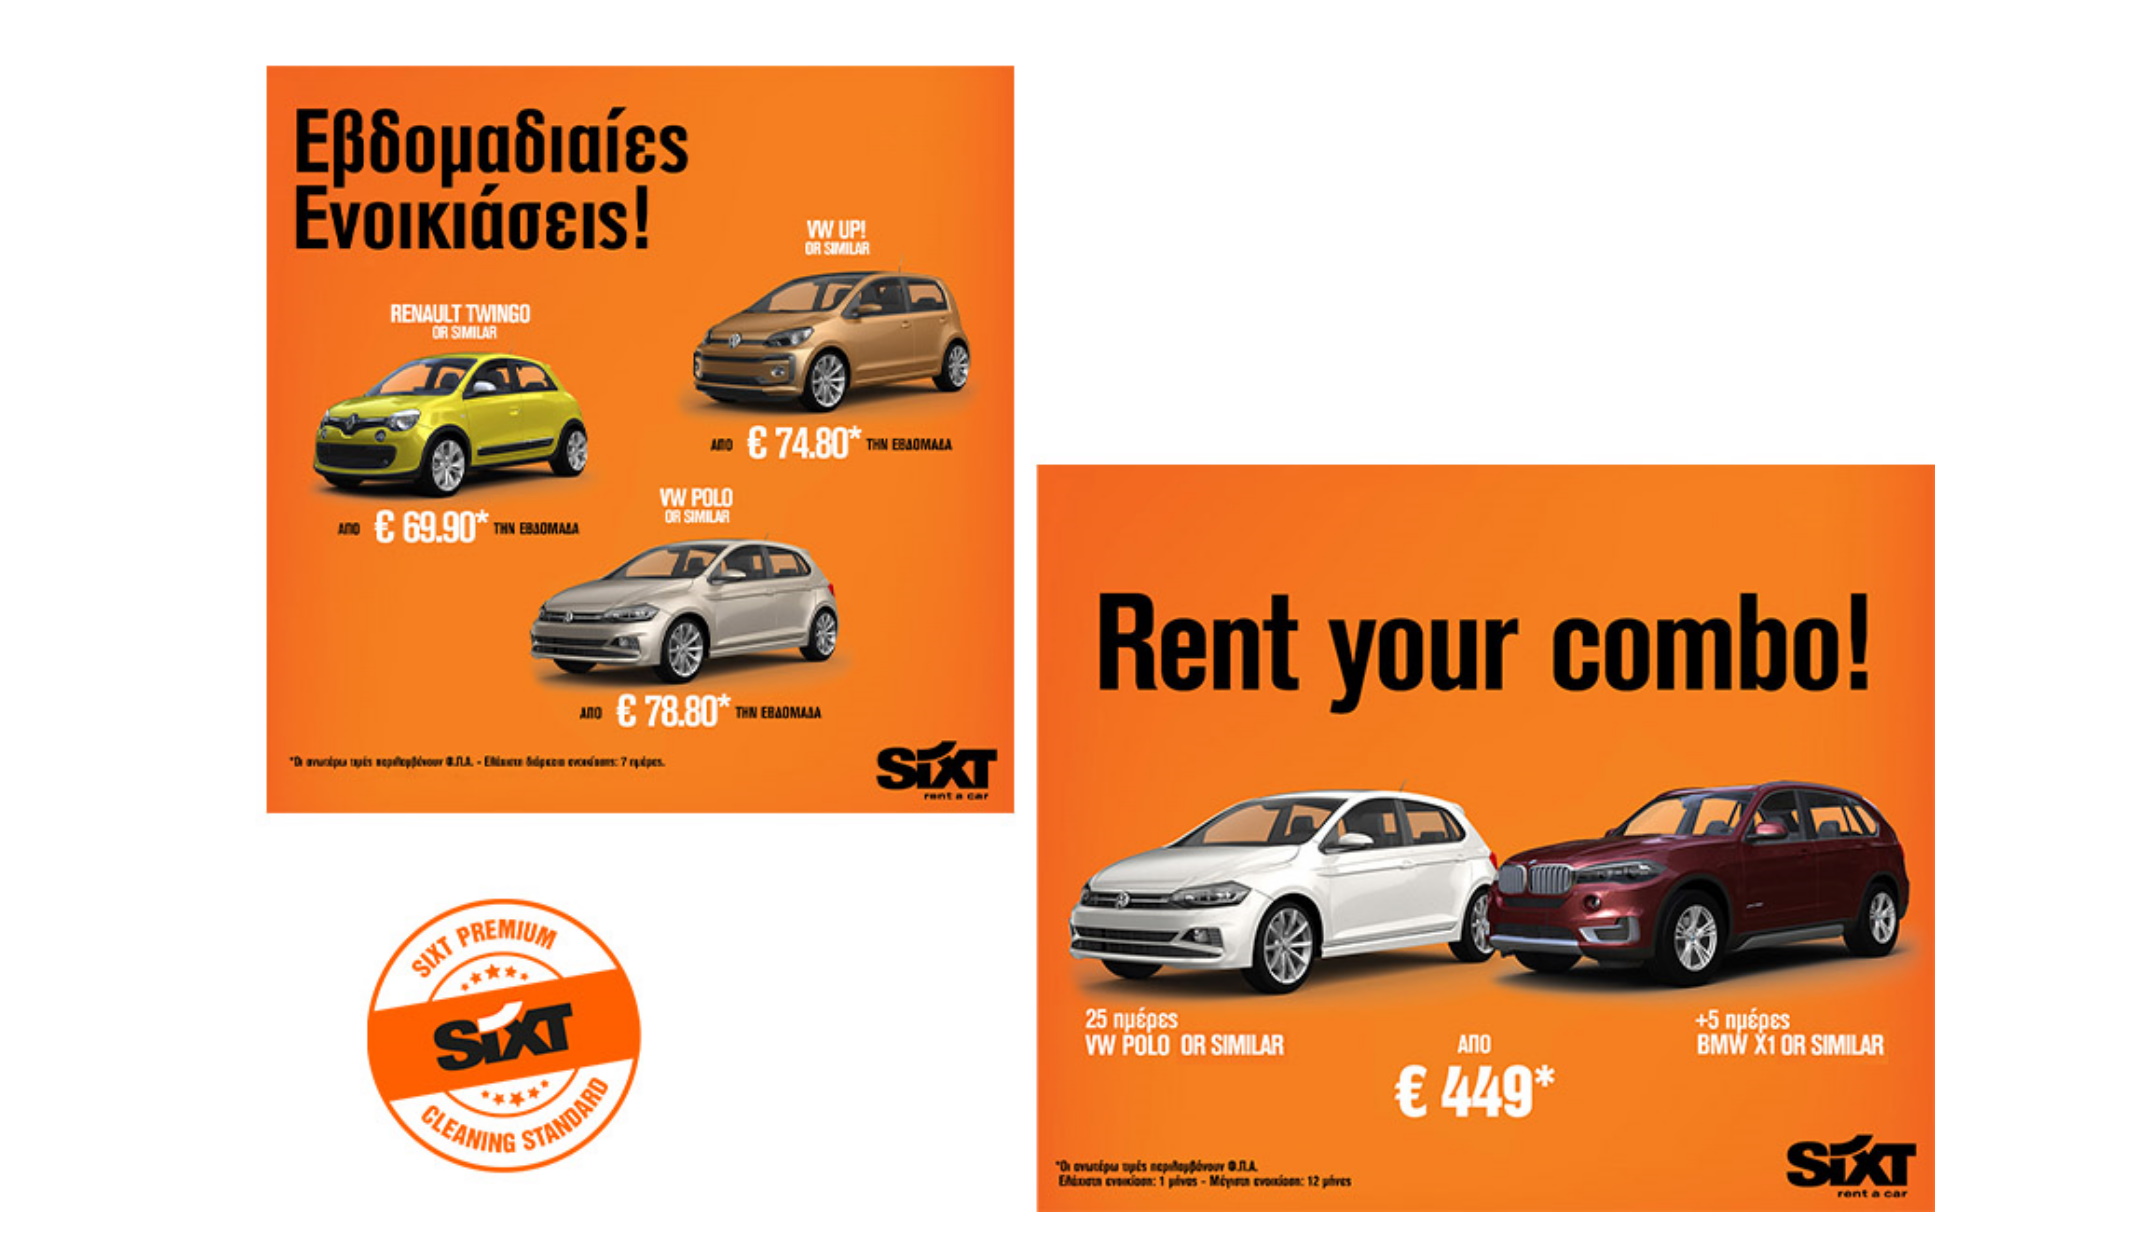 SIXT, your preferred mobility partner!